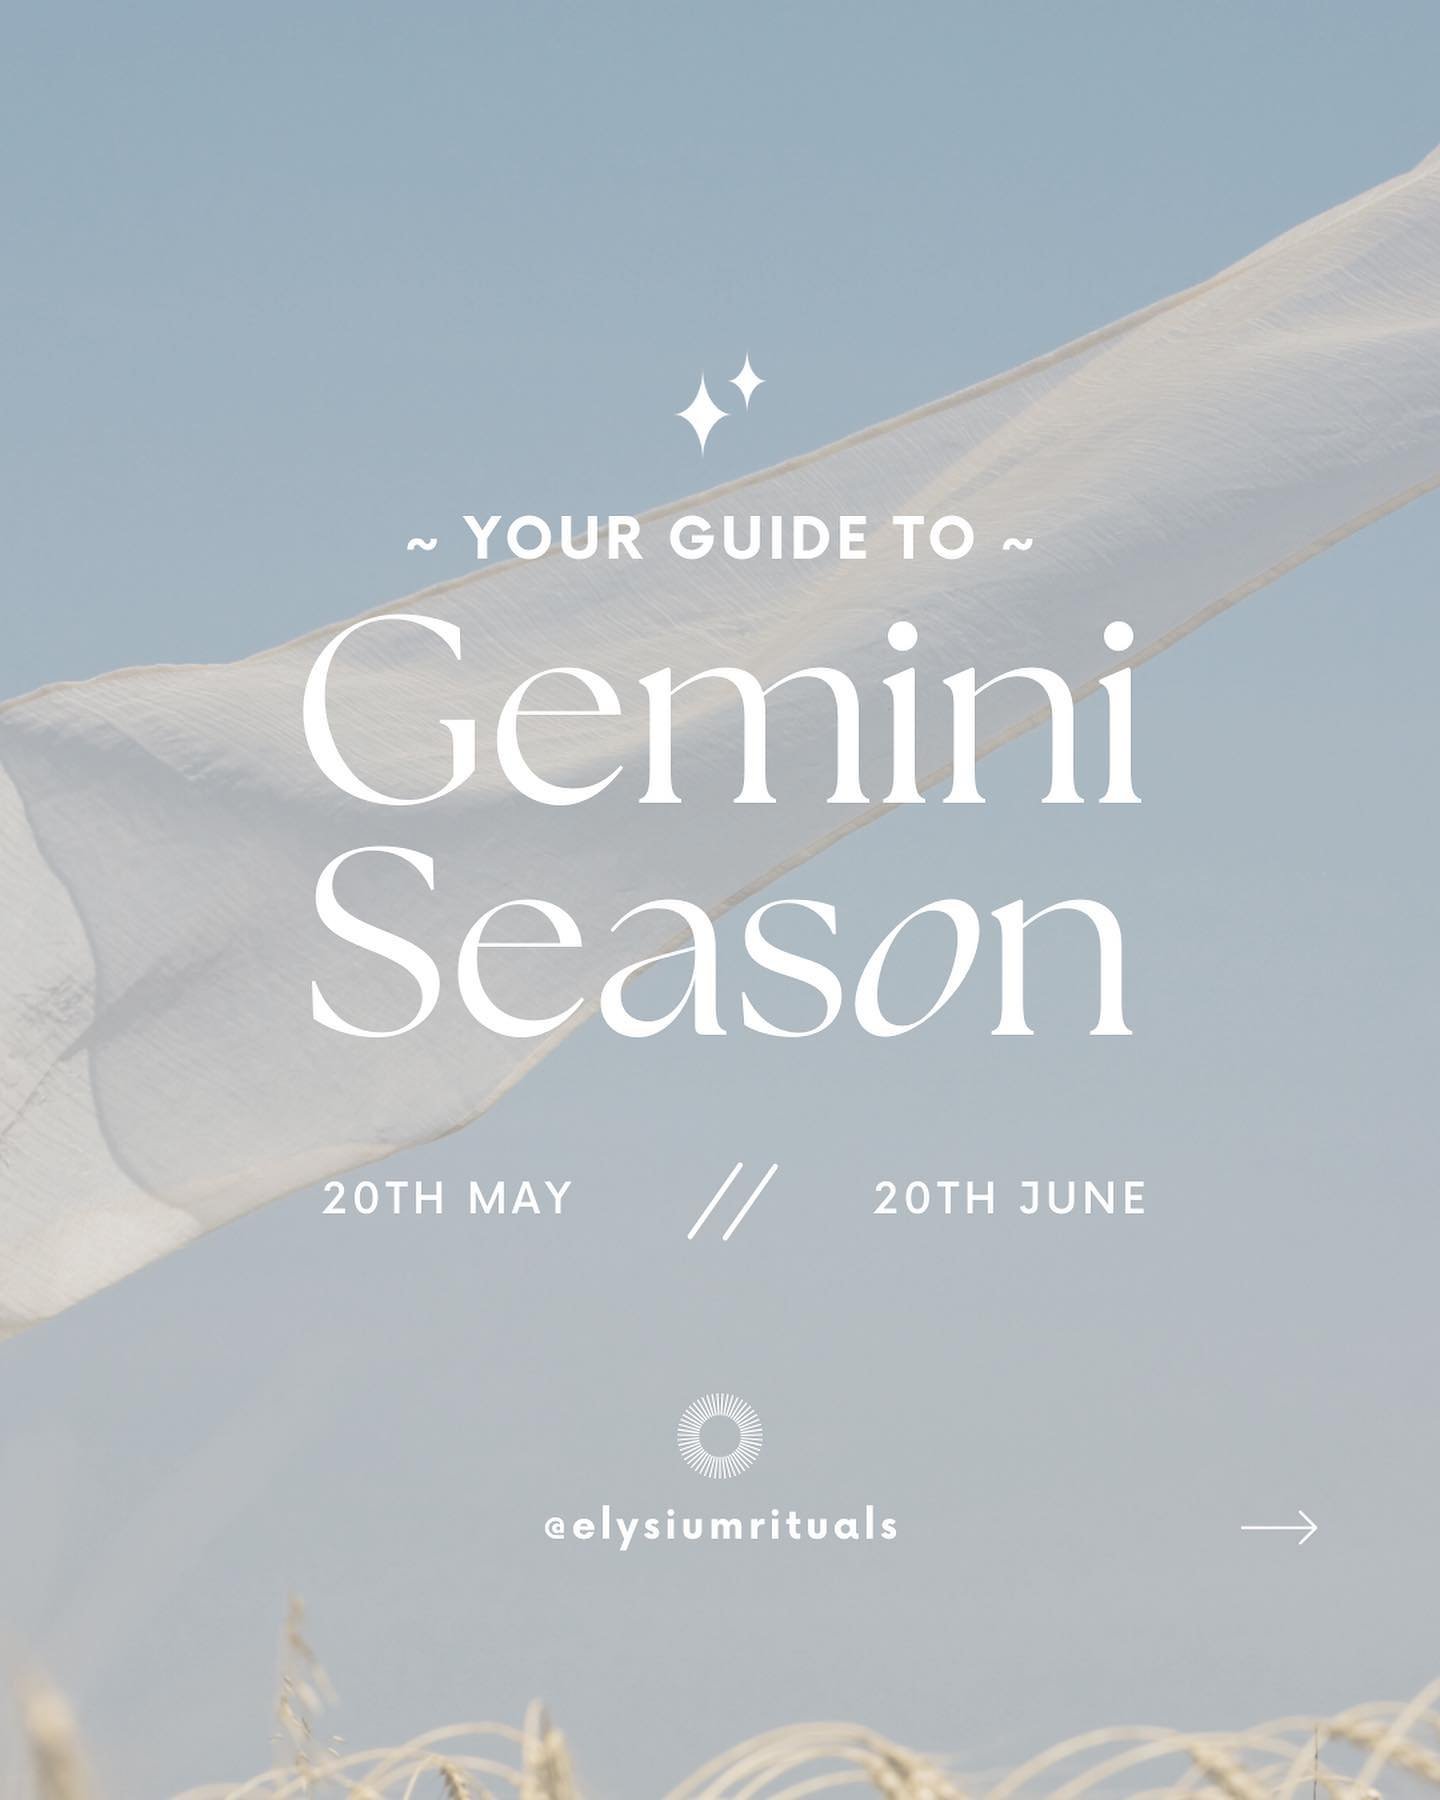 🌬️ GEMINI SEASON 🌬️ 

Generally this is a season of quickening pace, of flitting between people and things bright-eyed and bushy tailed. 

Gemini is the communicator of the Zodiac and relates to how we express ourselves and reflect off one another 